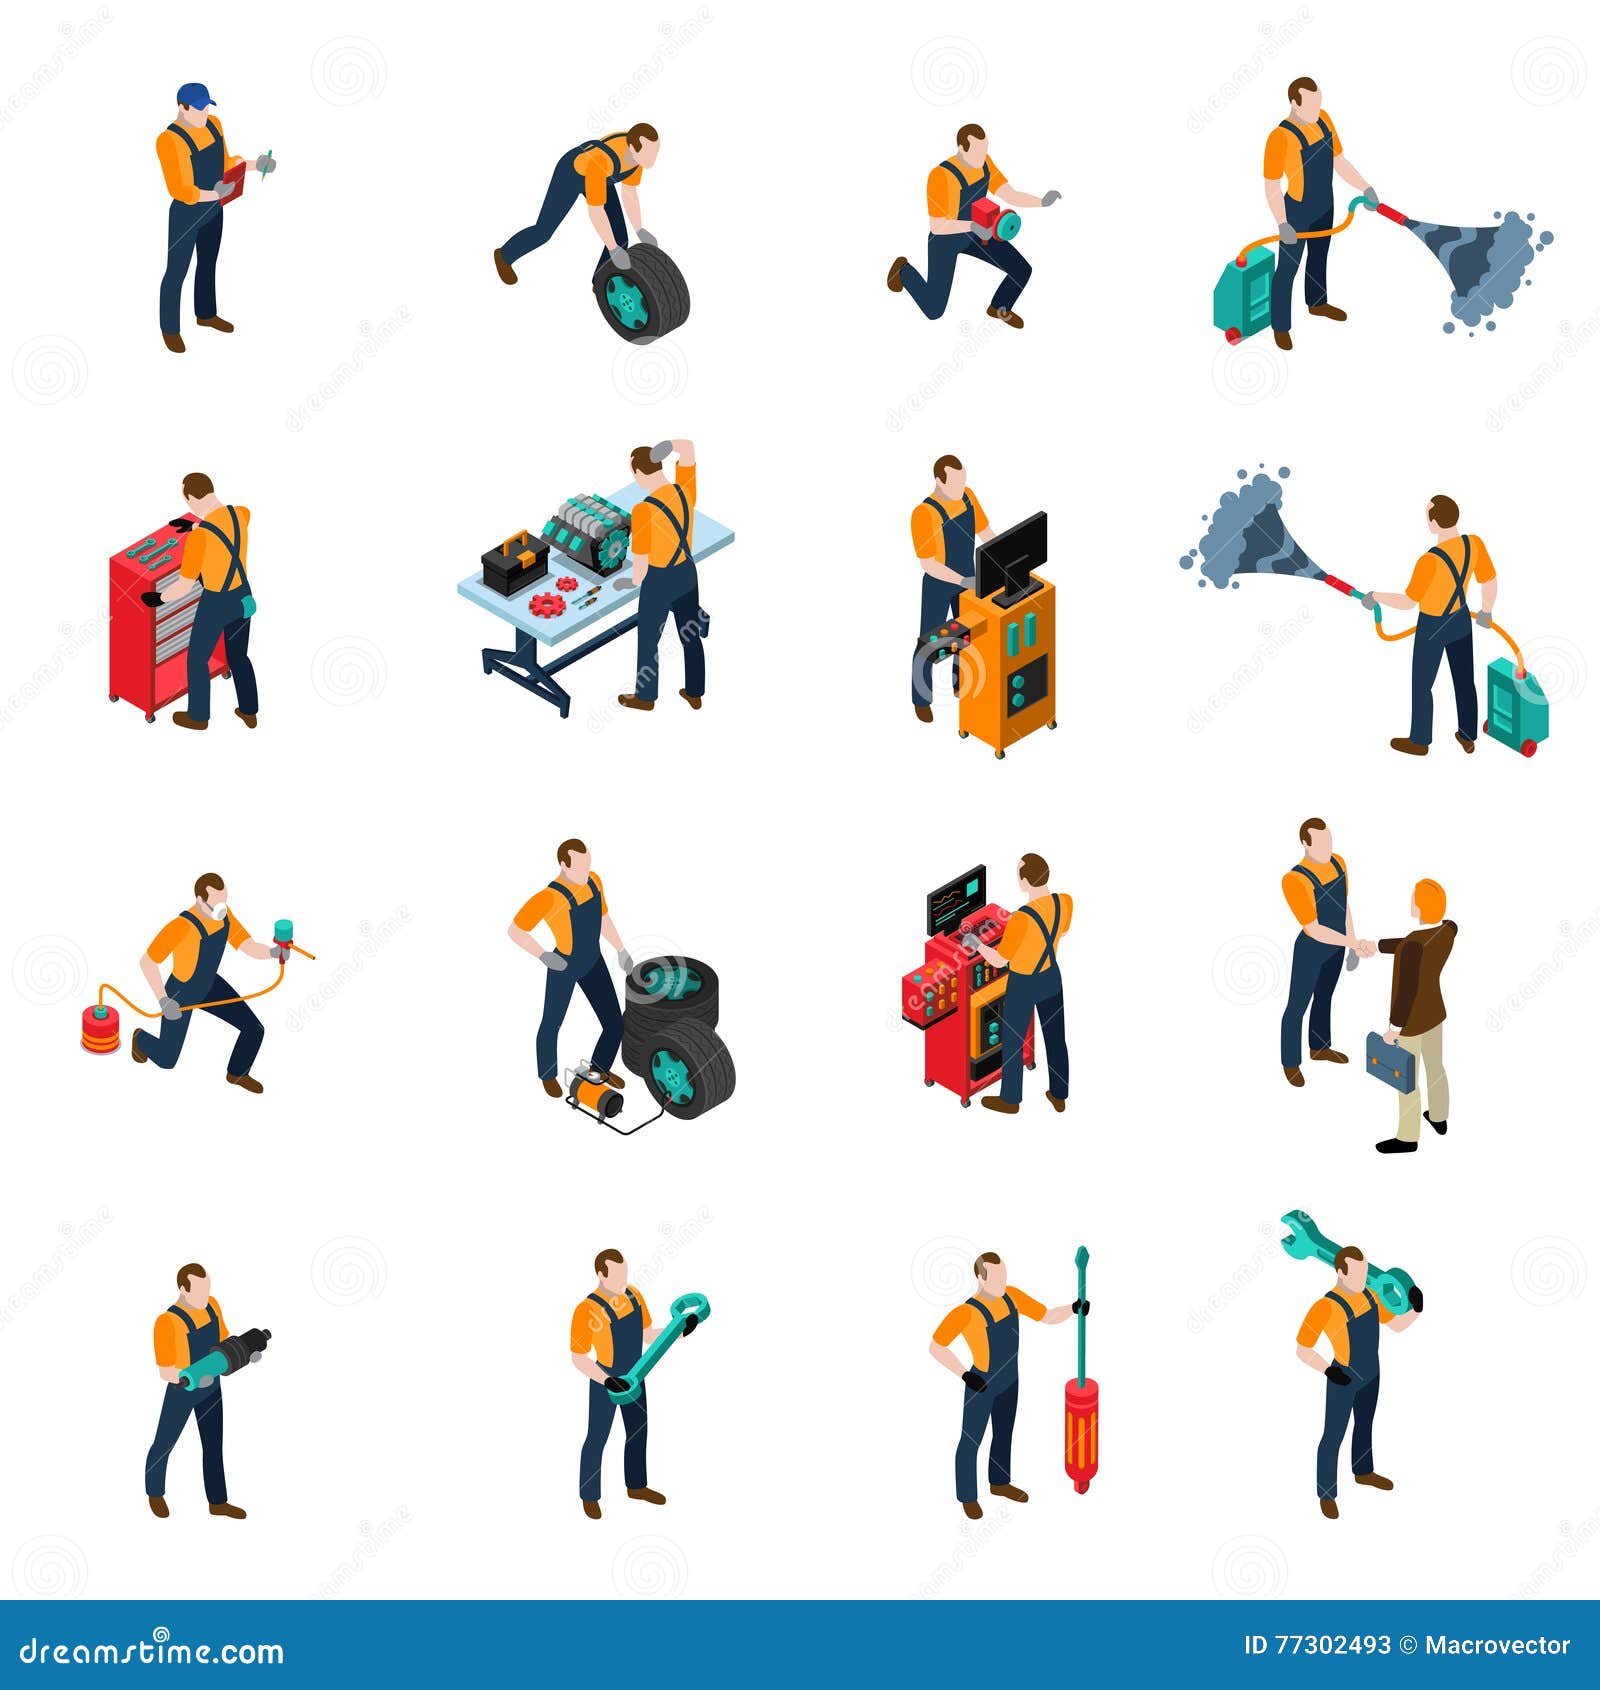 Car Service Icons Set. Car service isometric icons set with people and equipment symbols vector illustration